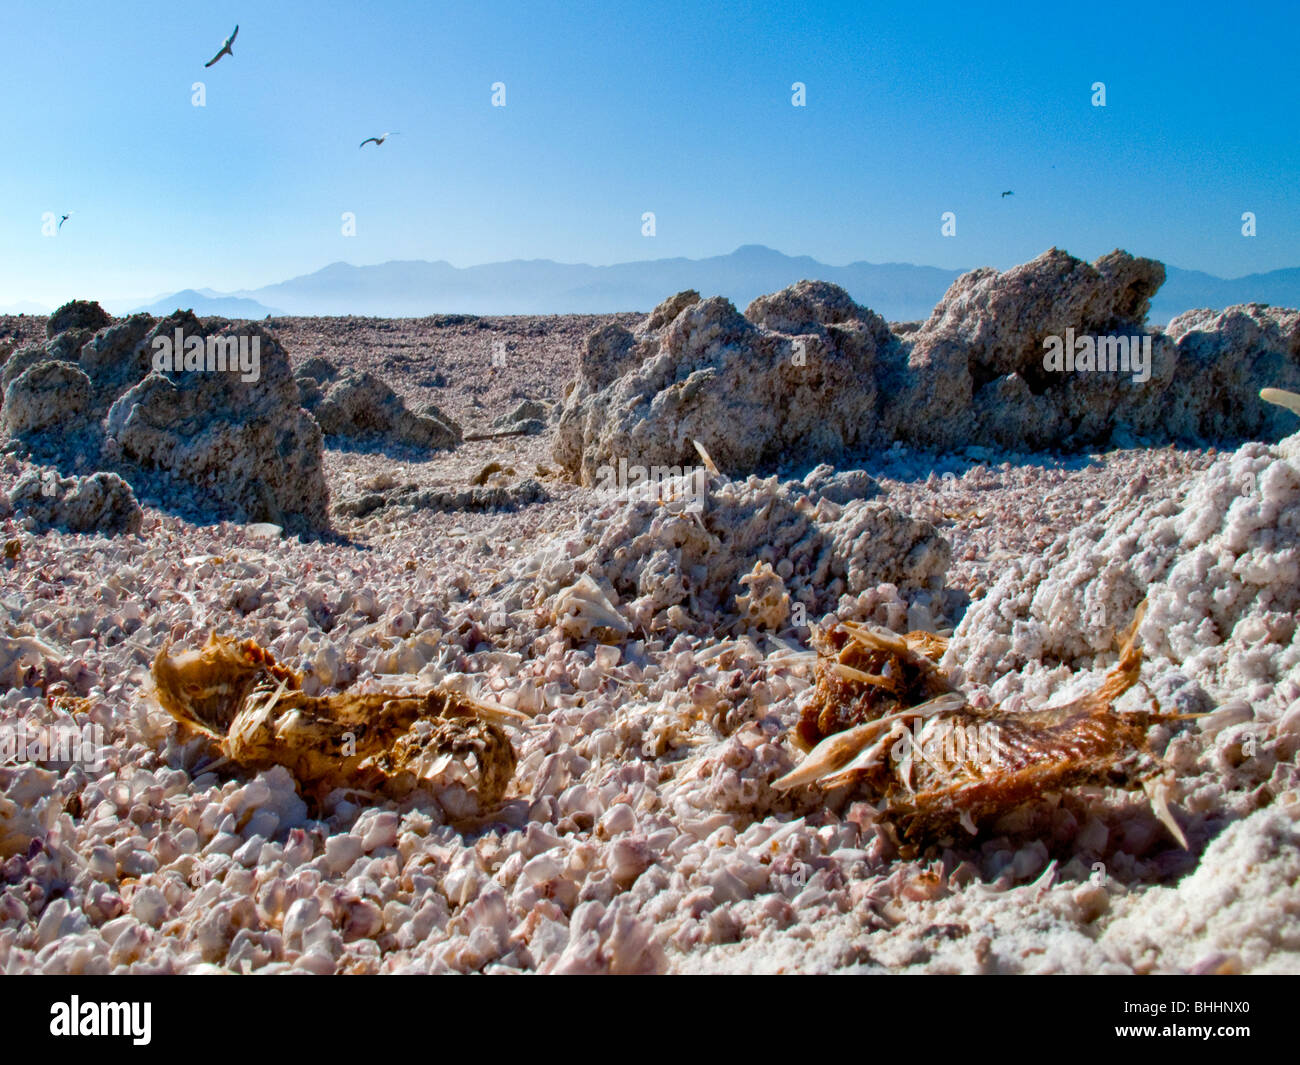 Dead Tilapia fish lie on the alkali flats of the south shore of Southern California's Salton Sea Stock Photo